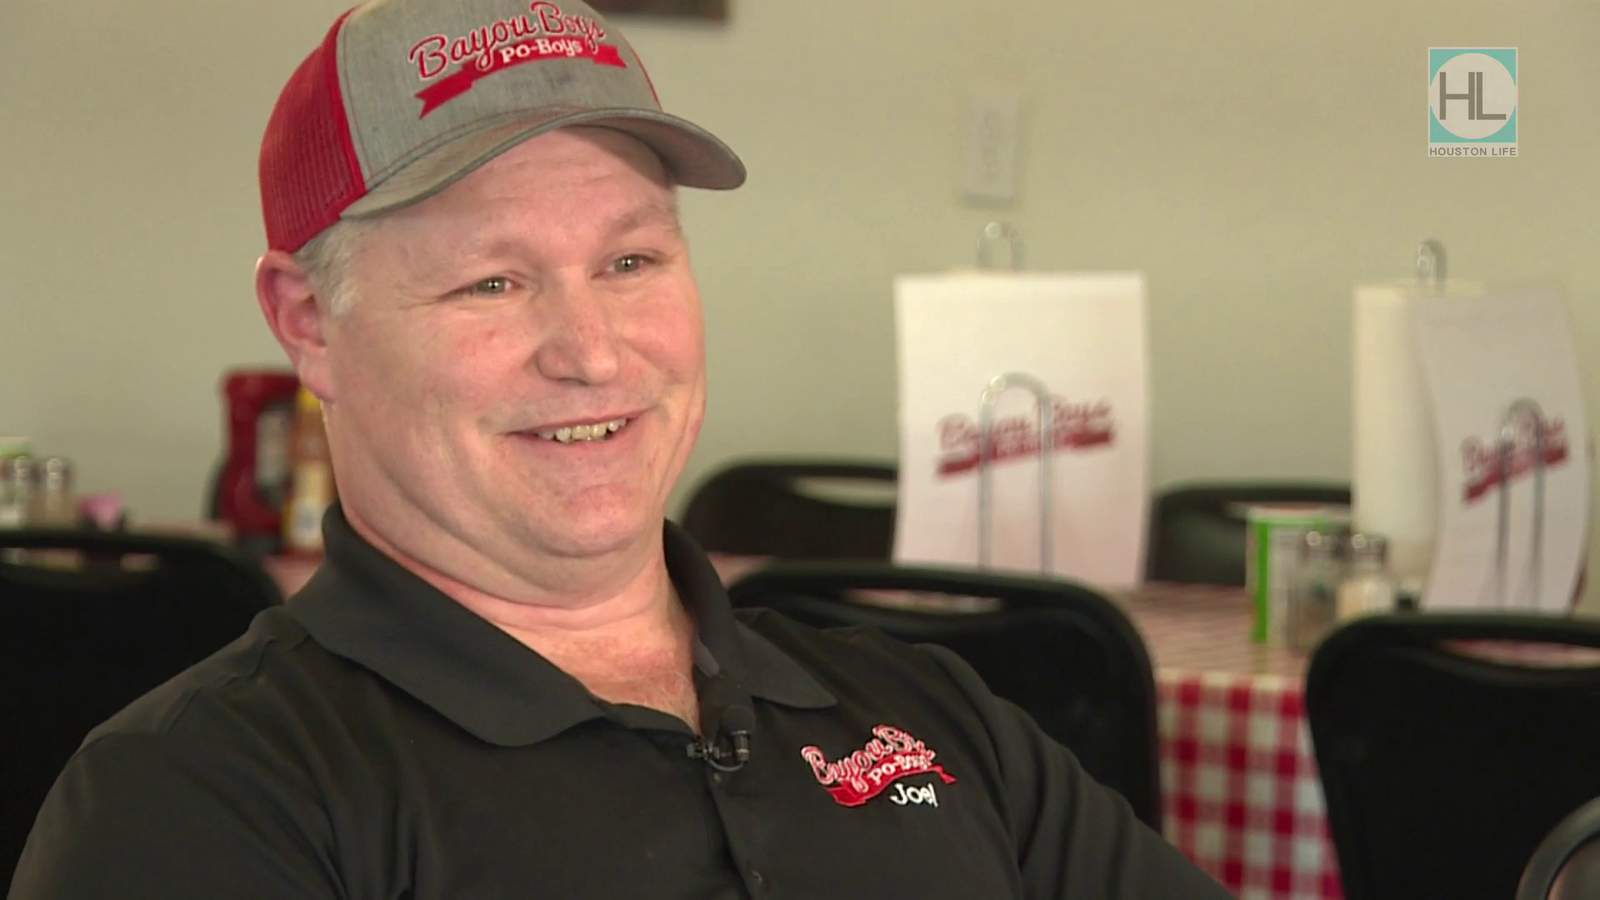 Meet the man with a heart of gold who's serving proper Cajun crawfish in Needville, Texas | HOUSTON LIFE | KPRC 2